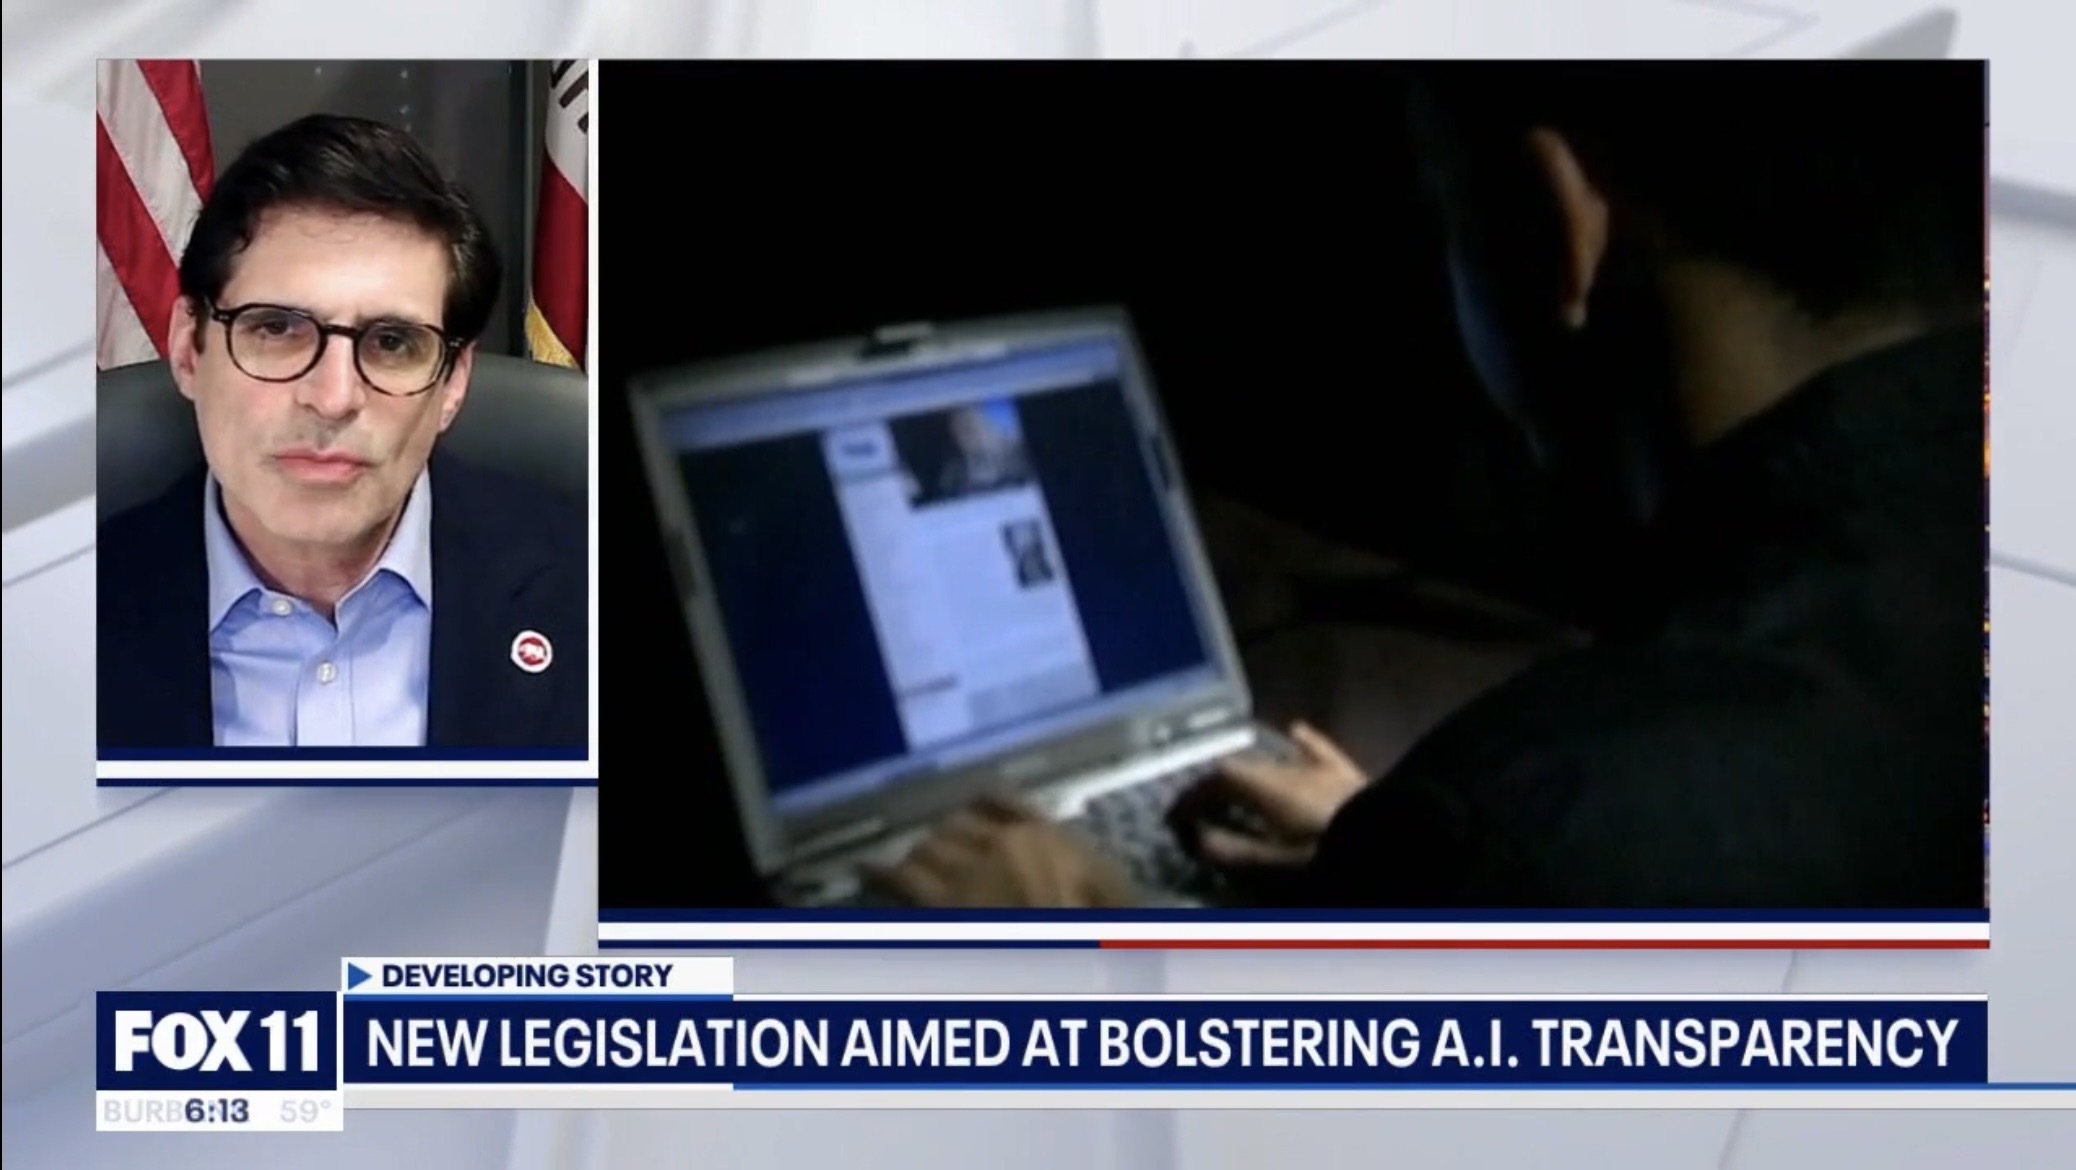 State Senator Josh Becker has been pursuing legislation to regulate artificial intelligence. He joined FOX 11 to discuss the issues of AI and his work in the legislature.